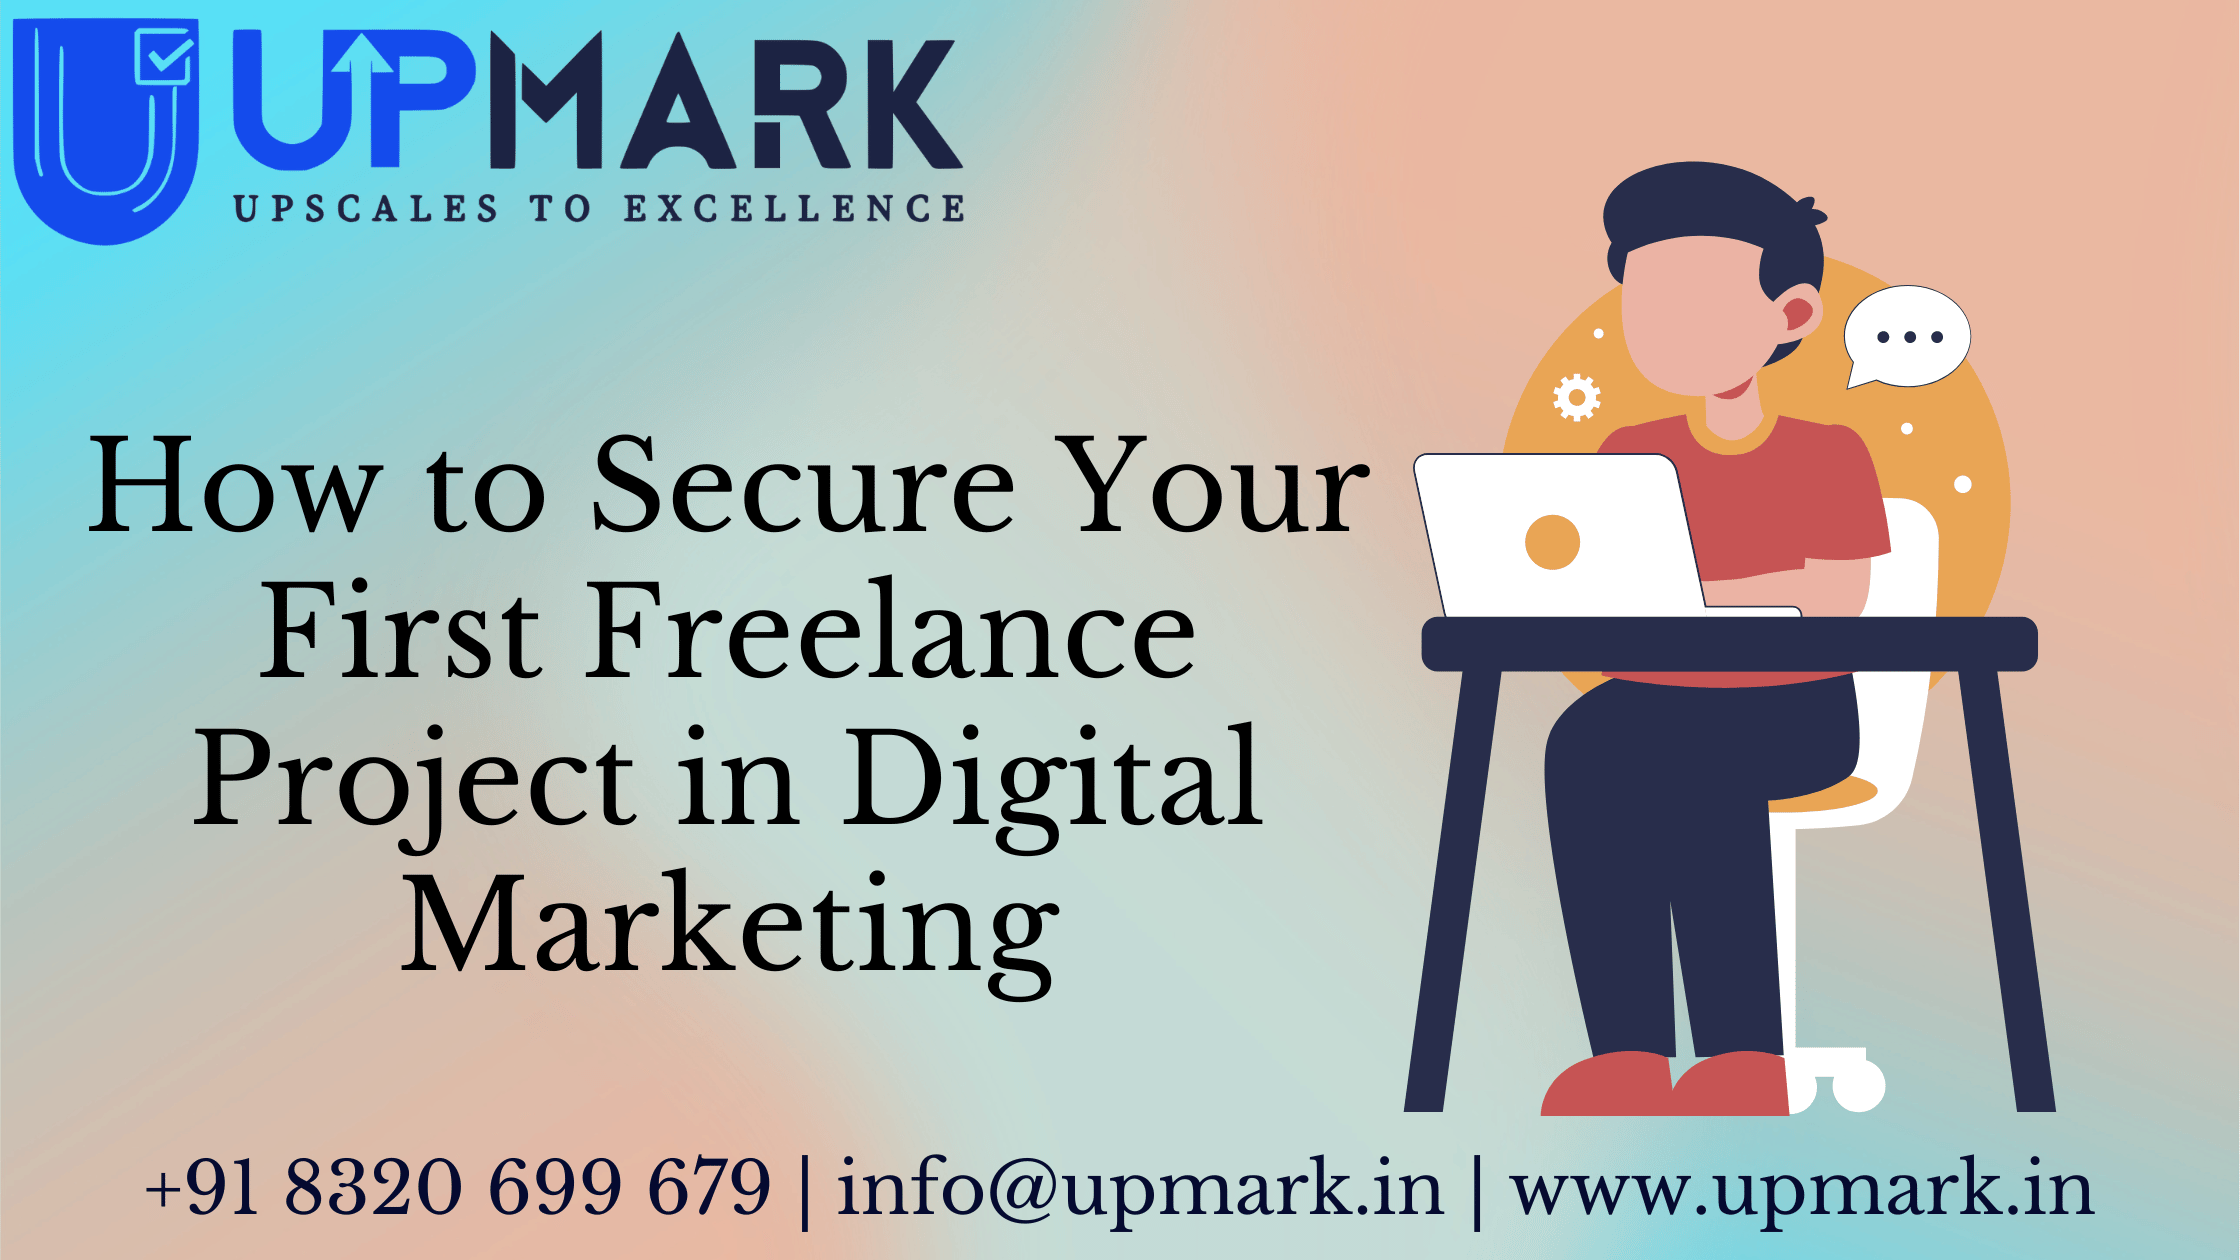 How to Secure Your First Freelance Project in Digital Marketing